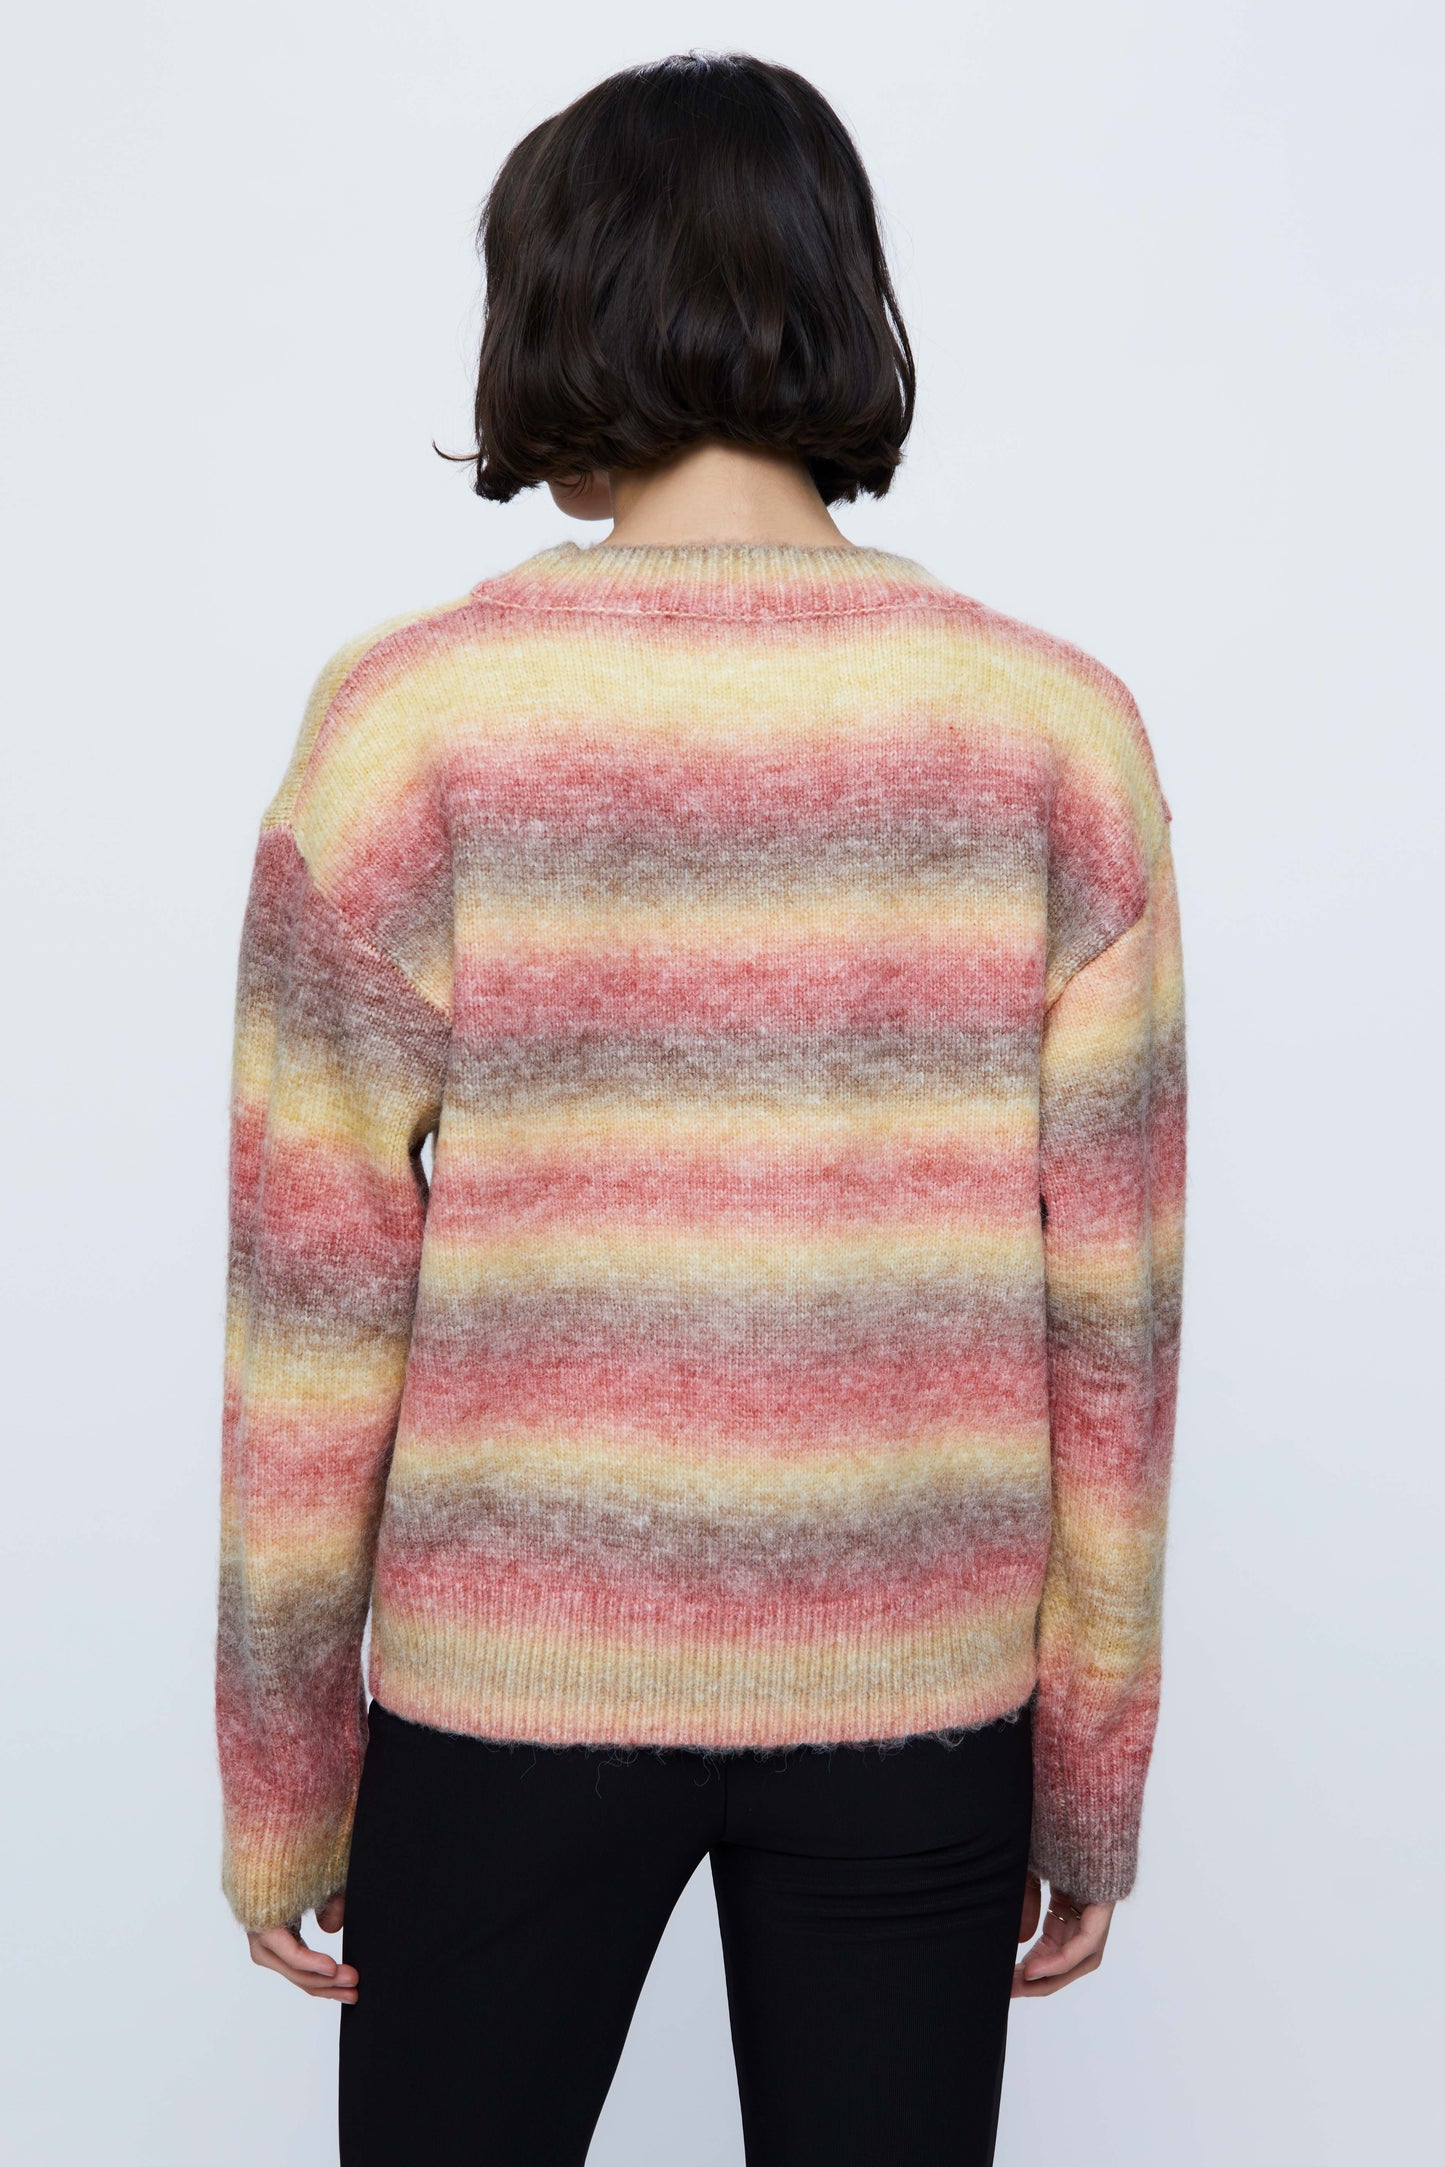 Textured knit sweater with multicolored stripes